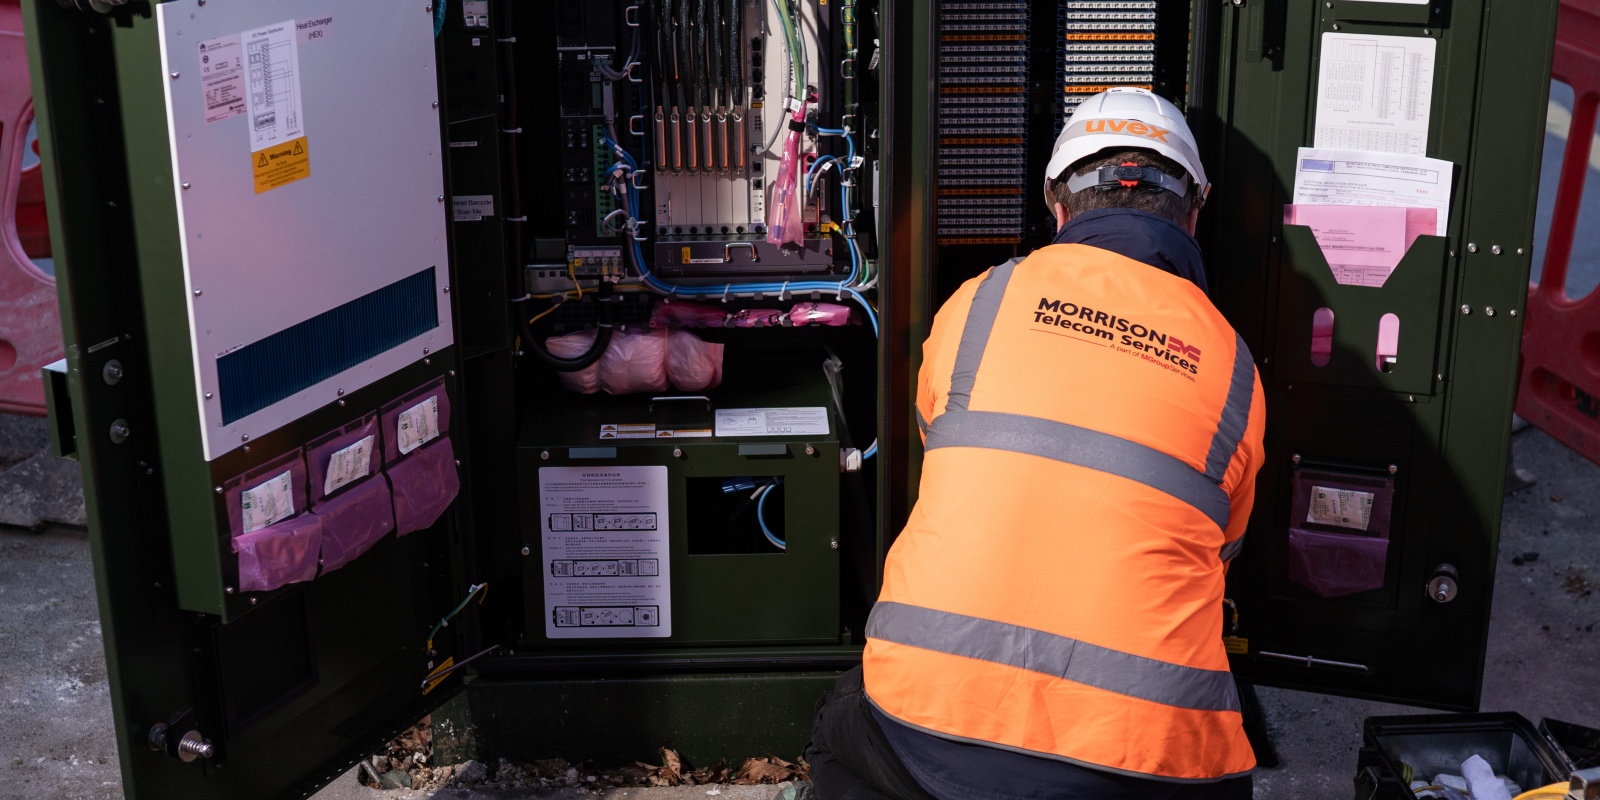 Morrison Telecom Services awarded new work from Openreach to support the UK’s biggest ultrafast broadband build